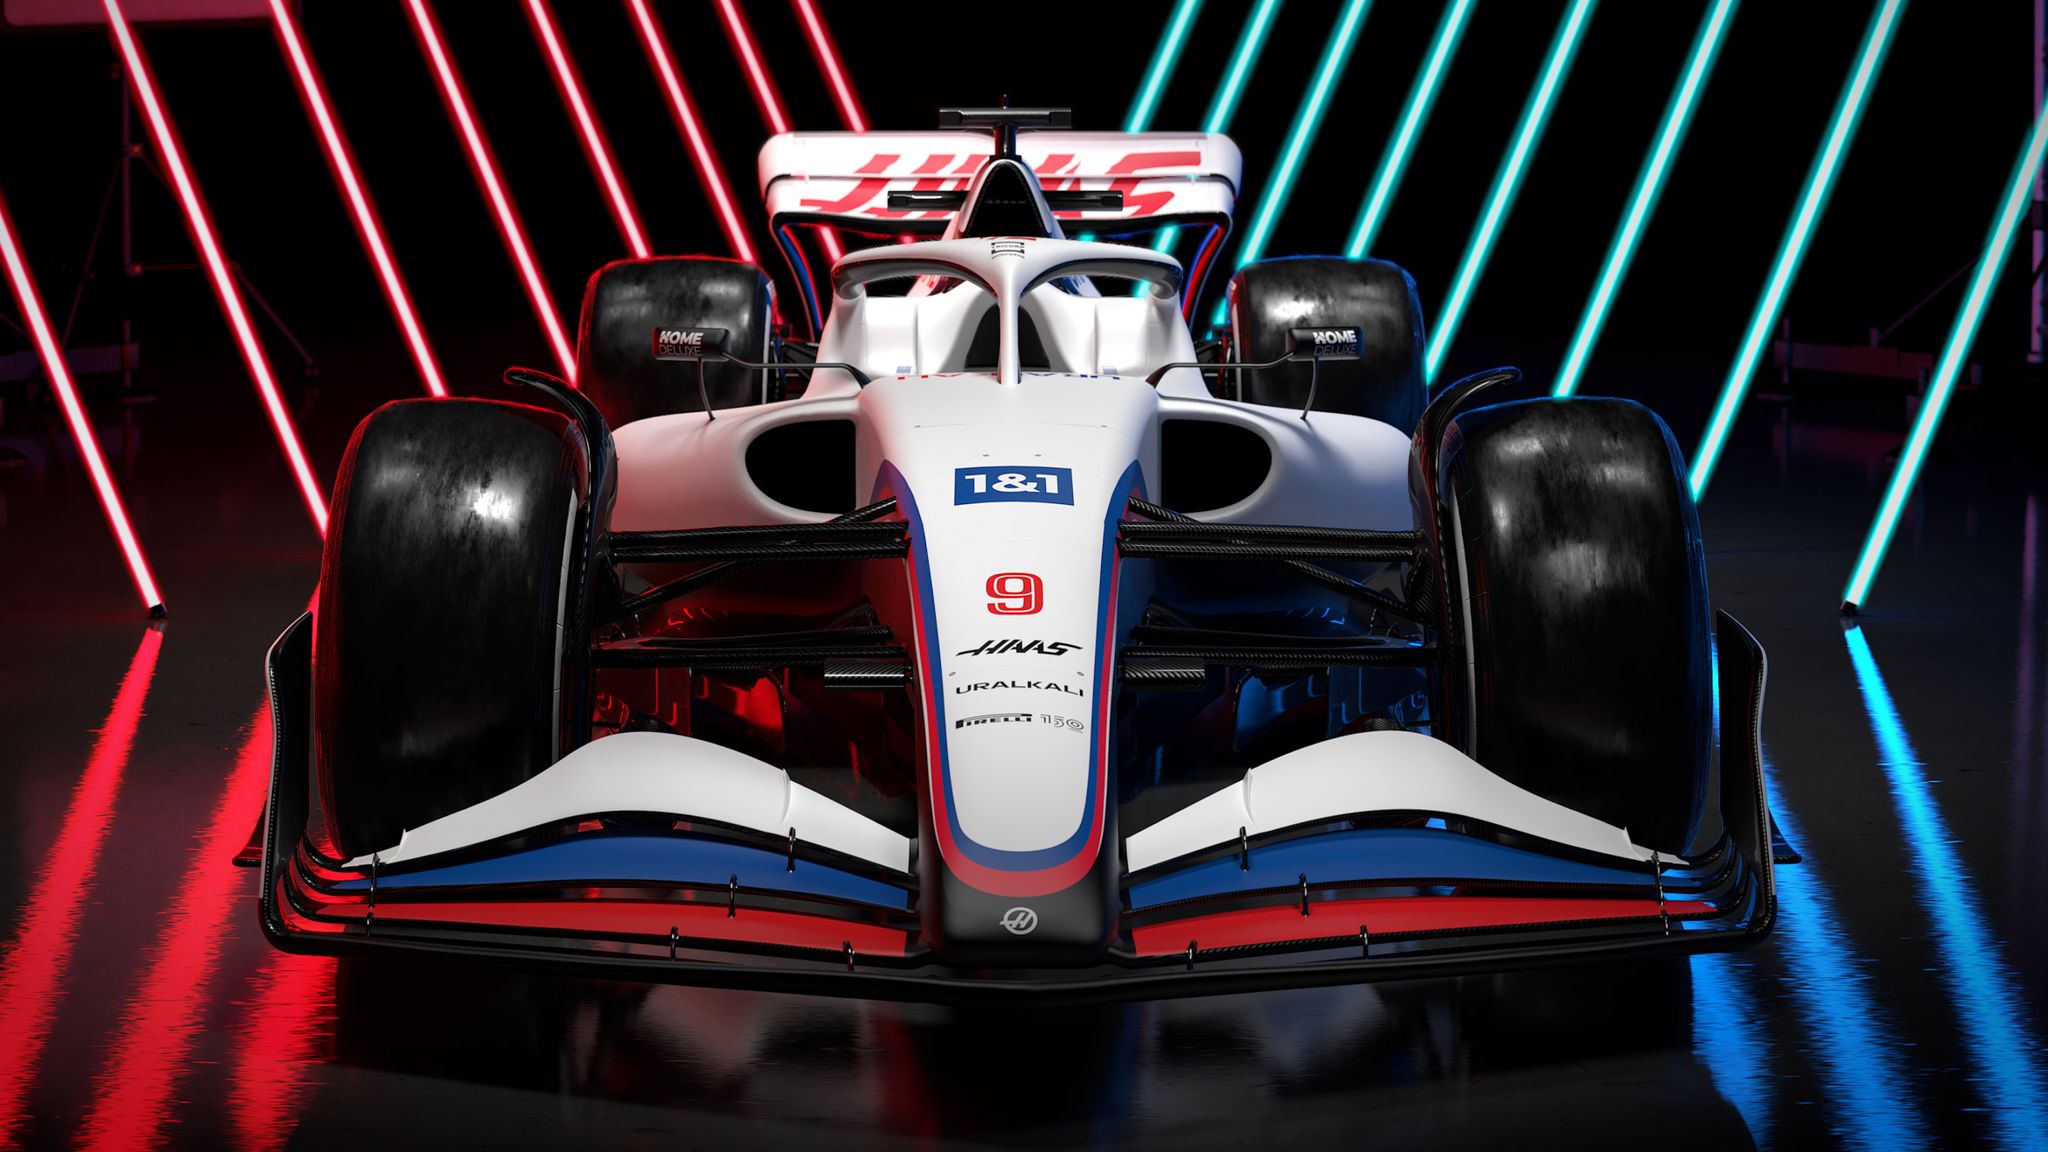 Formula 1 Haas kickstart revolutionary 2022 era with first look at new car and livery F1 News